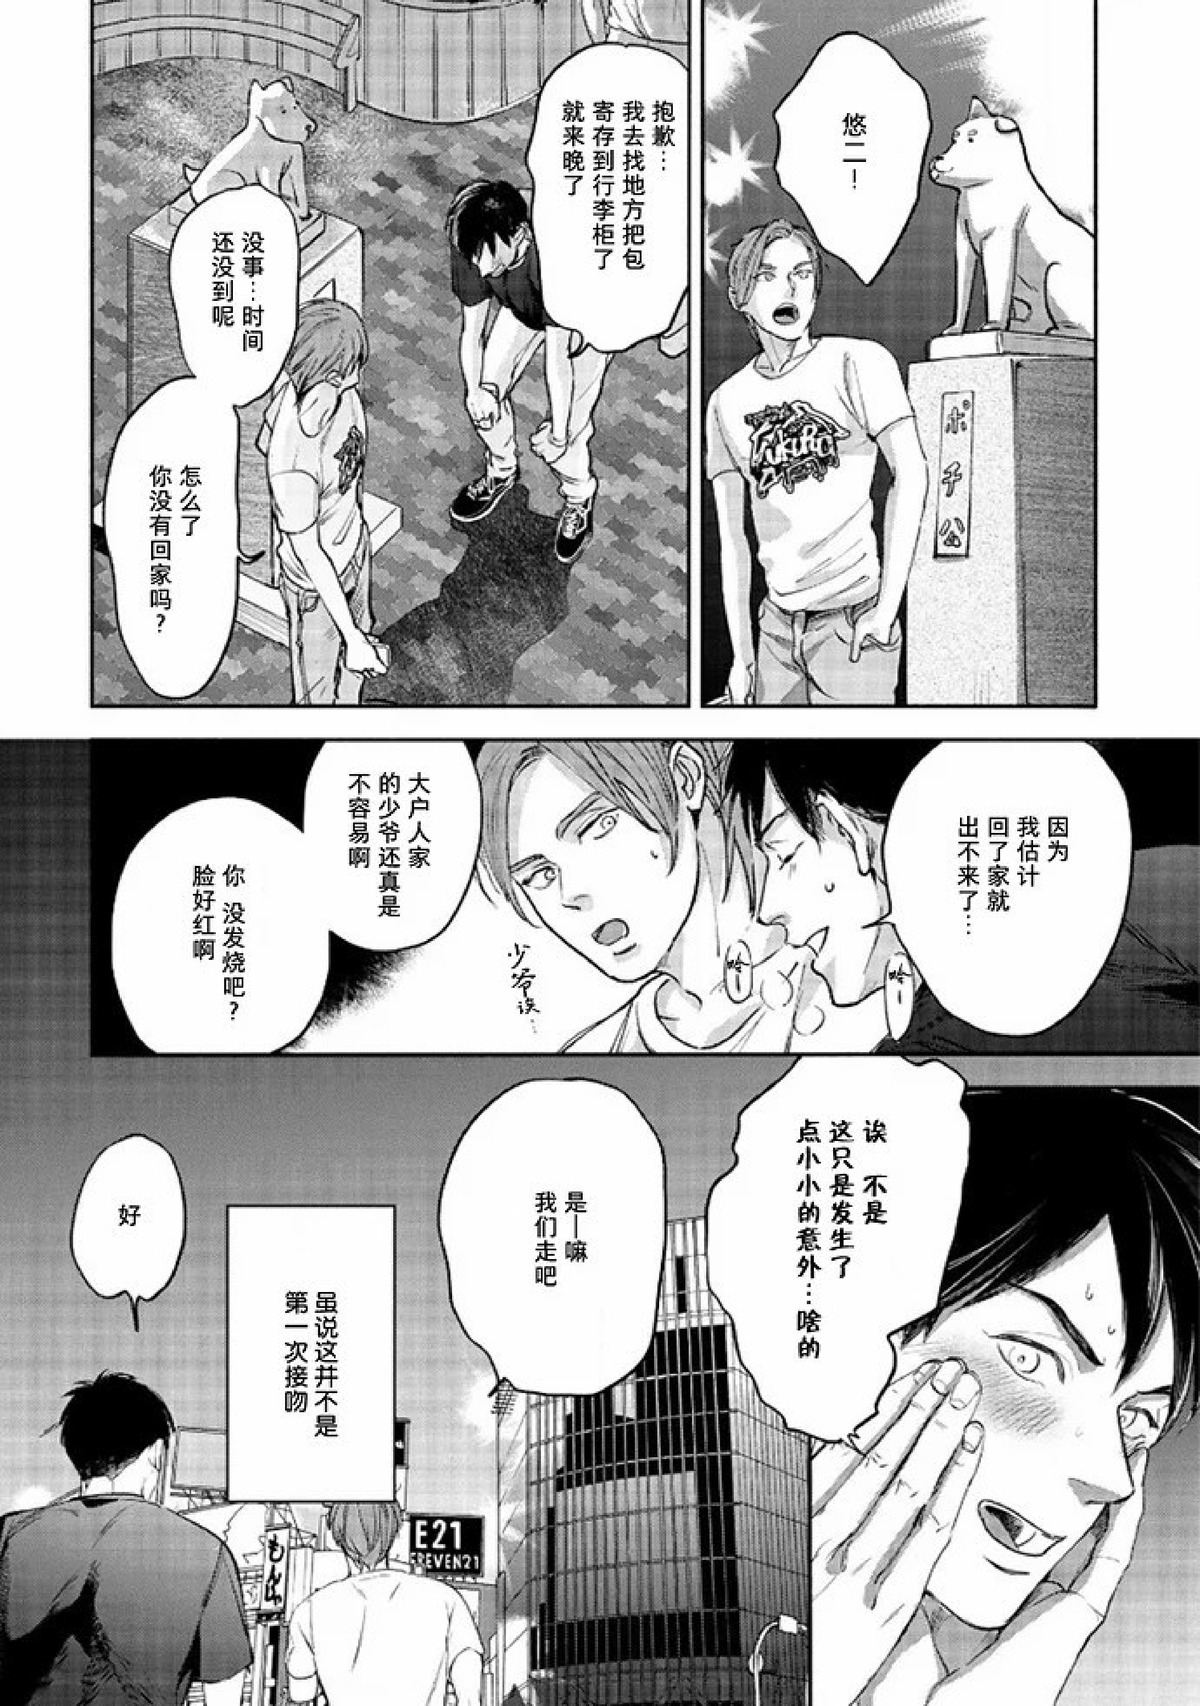 【Two sides of the same coin[腐漫]】漫画-（上卷01-02）章节漫画下拉式图片-40.jpg